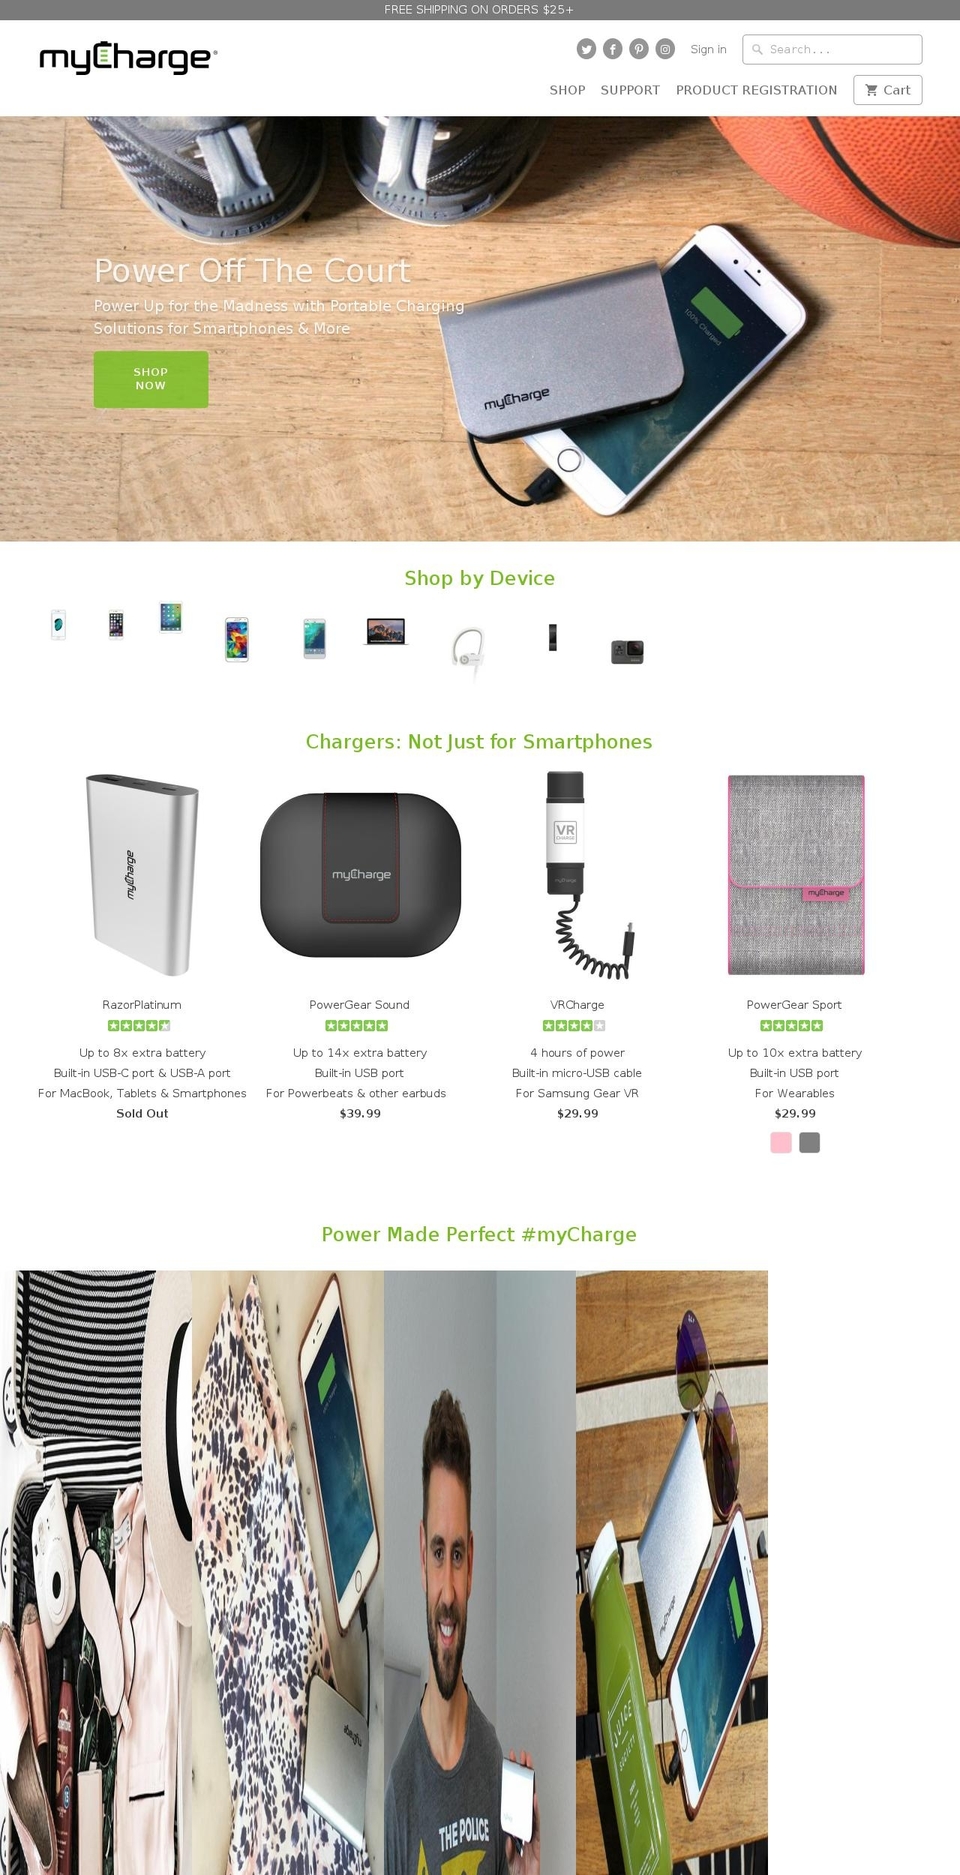 August Shopify theme site example mycharge.com